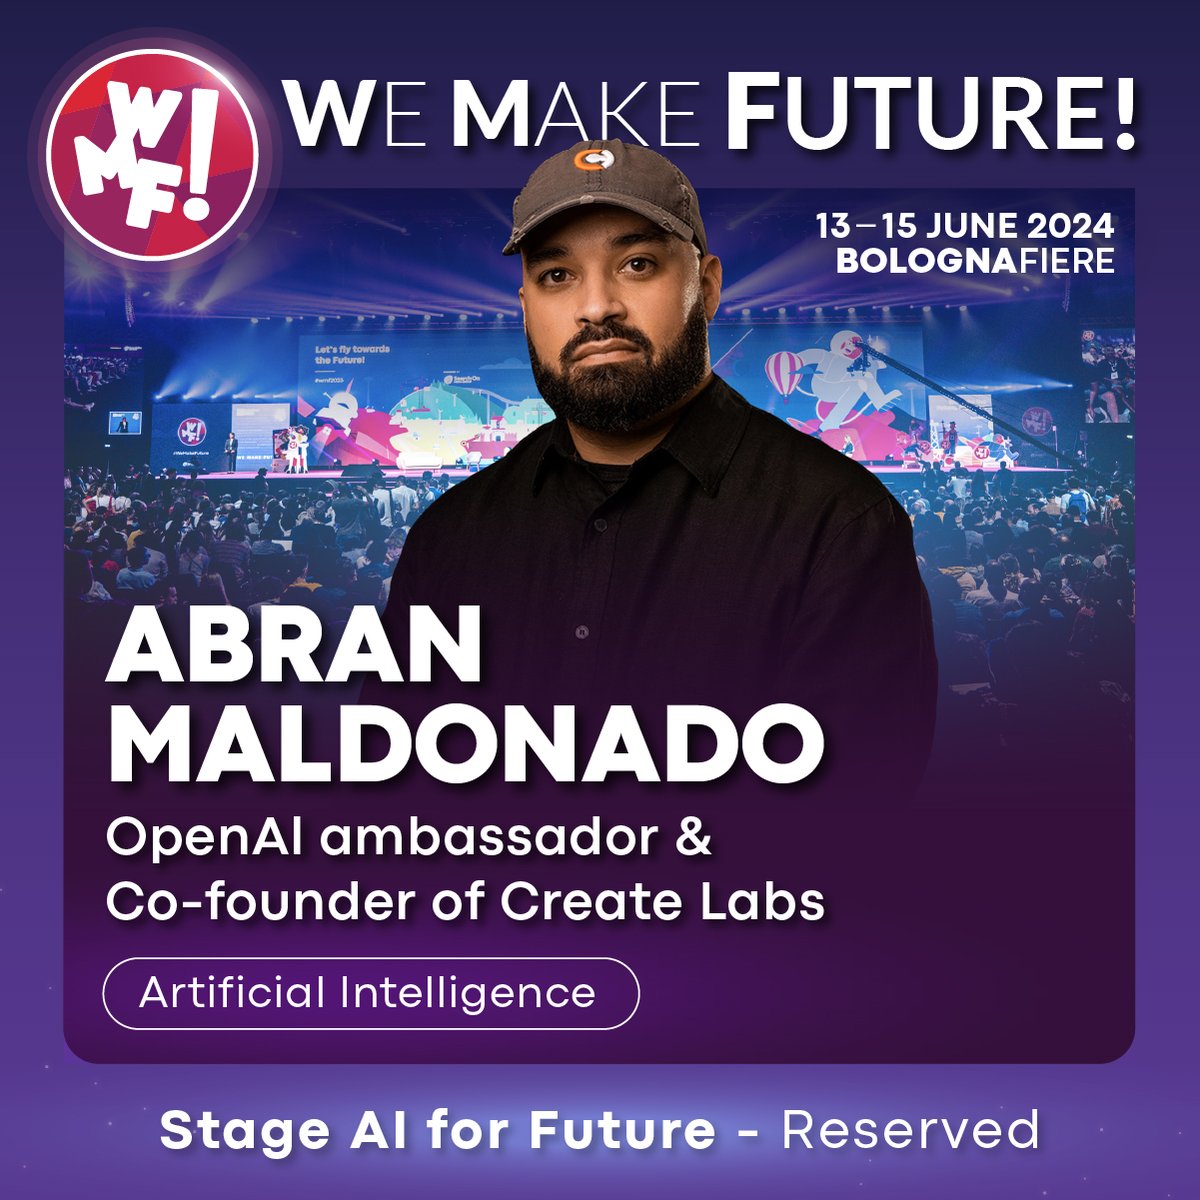 Abran Maldonado, OpenAI ambassador and co-founder of Create Labs, will be speaking about artificial intelligence and education on the AI for Future Stage at #WMF2024. Gain Access to all the WMF Reserved Stages only by purchasing the Full Ticket en.wemakefuture.it/ticket/